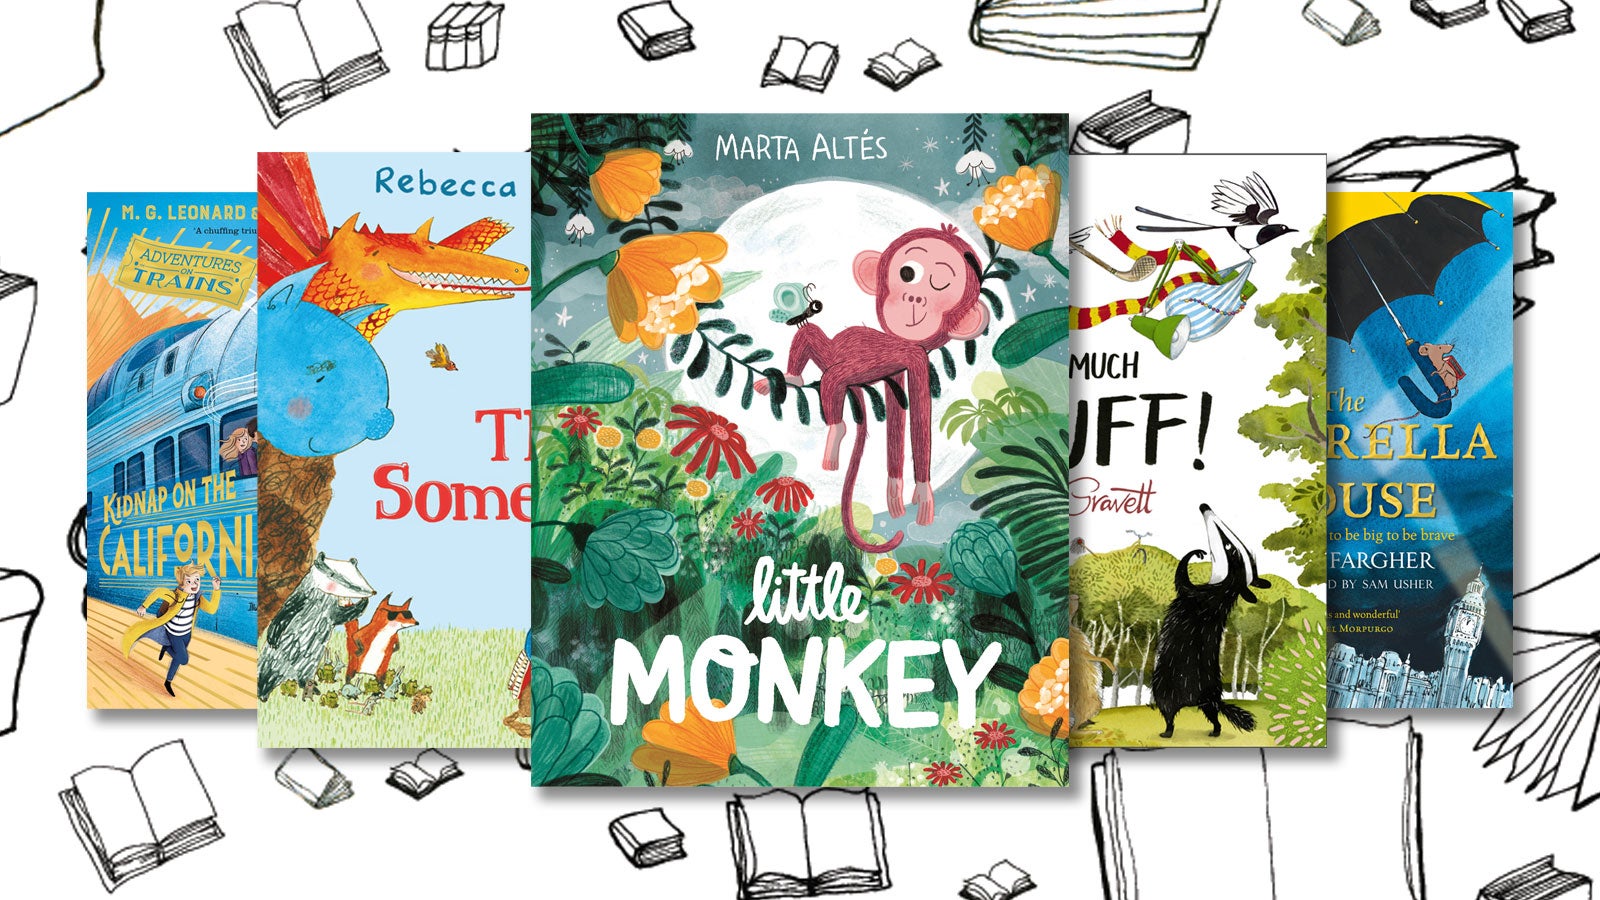 Book covers for Little Monkey, The Something, Too Much Stuff, The Umbrella Mouse and Kidnap on the California Comet, against a monochrome background of books